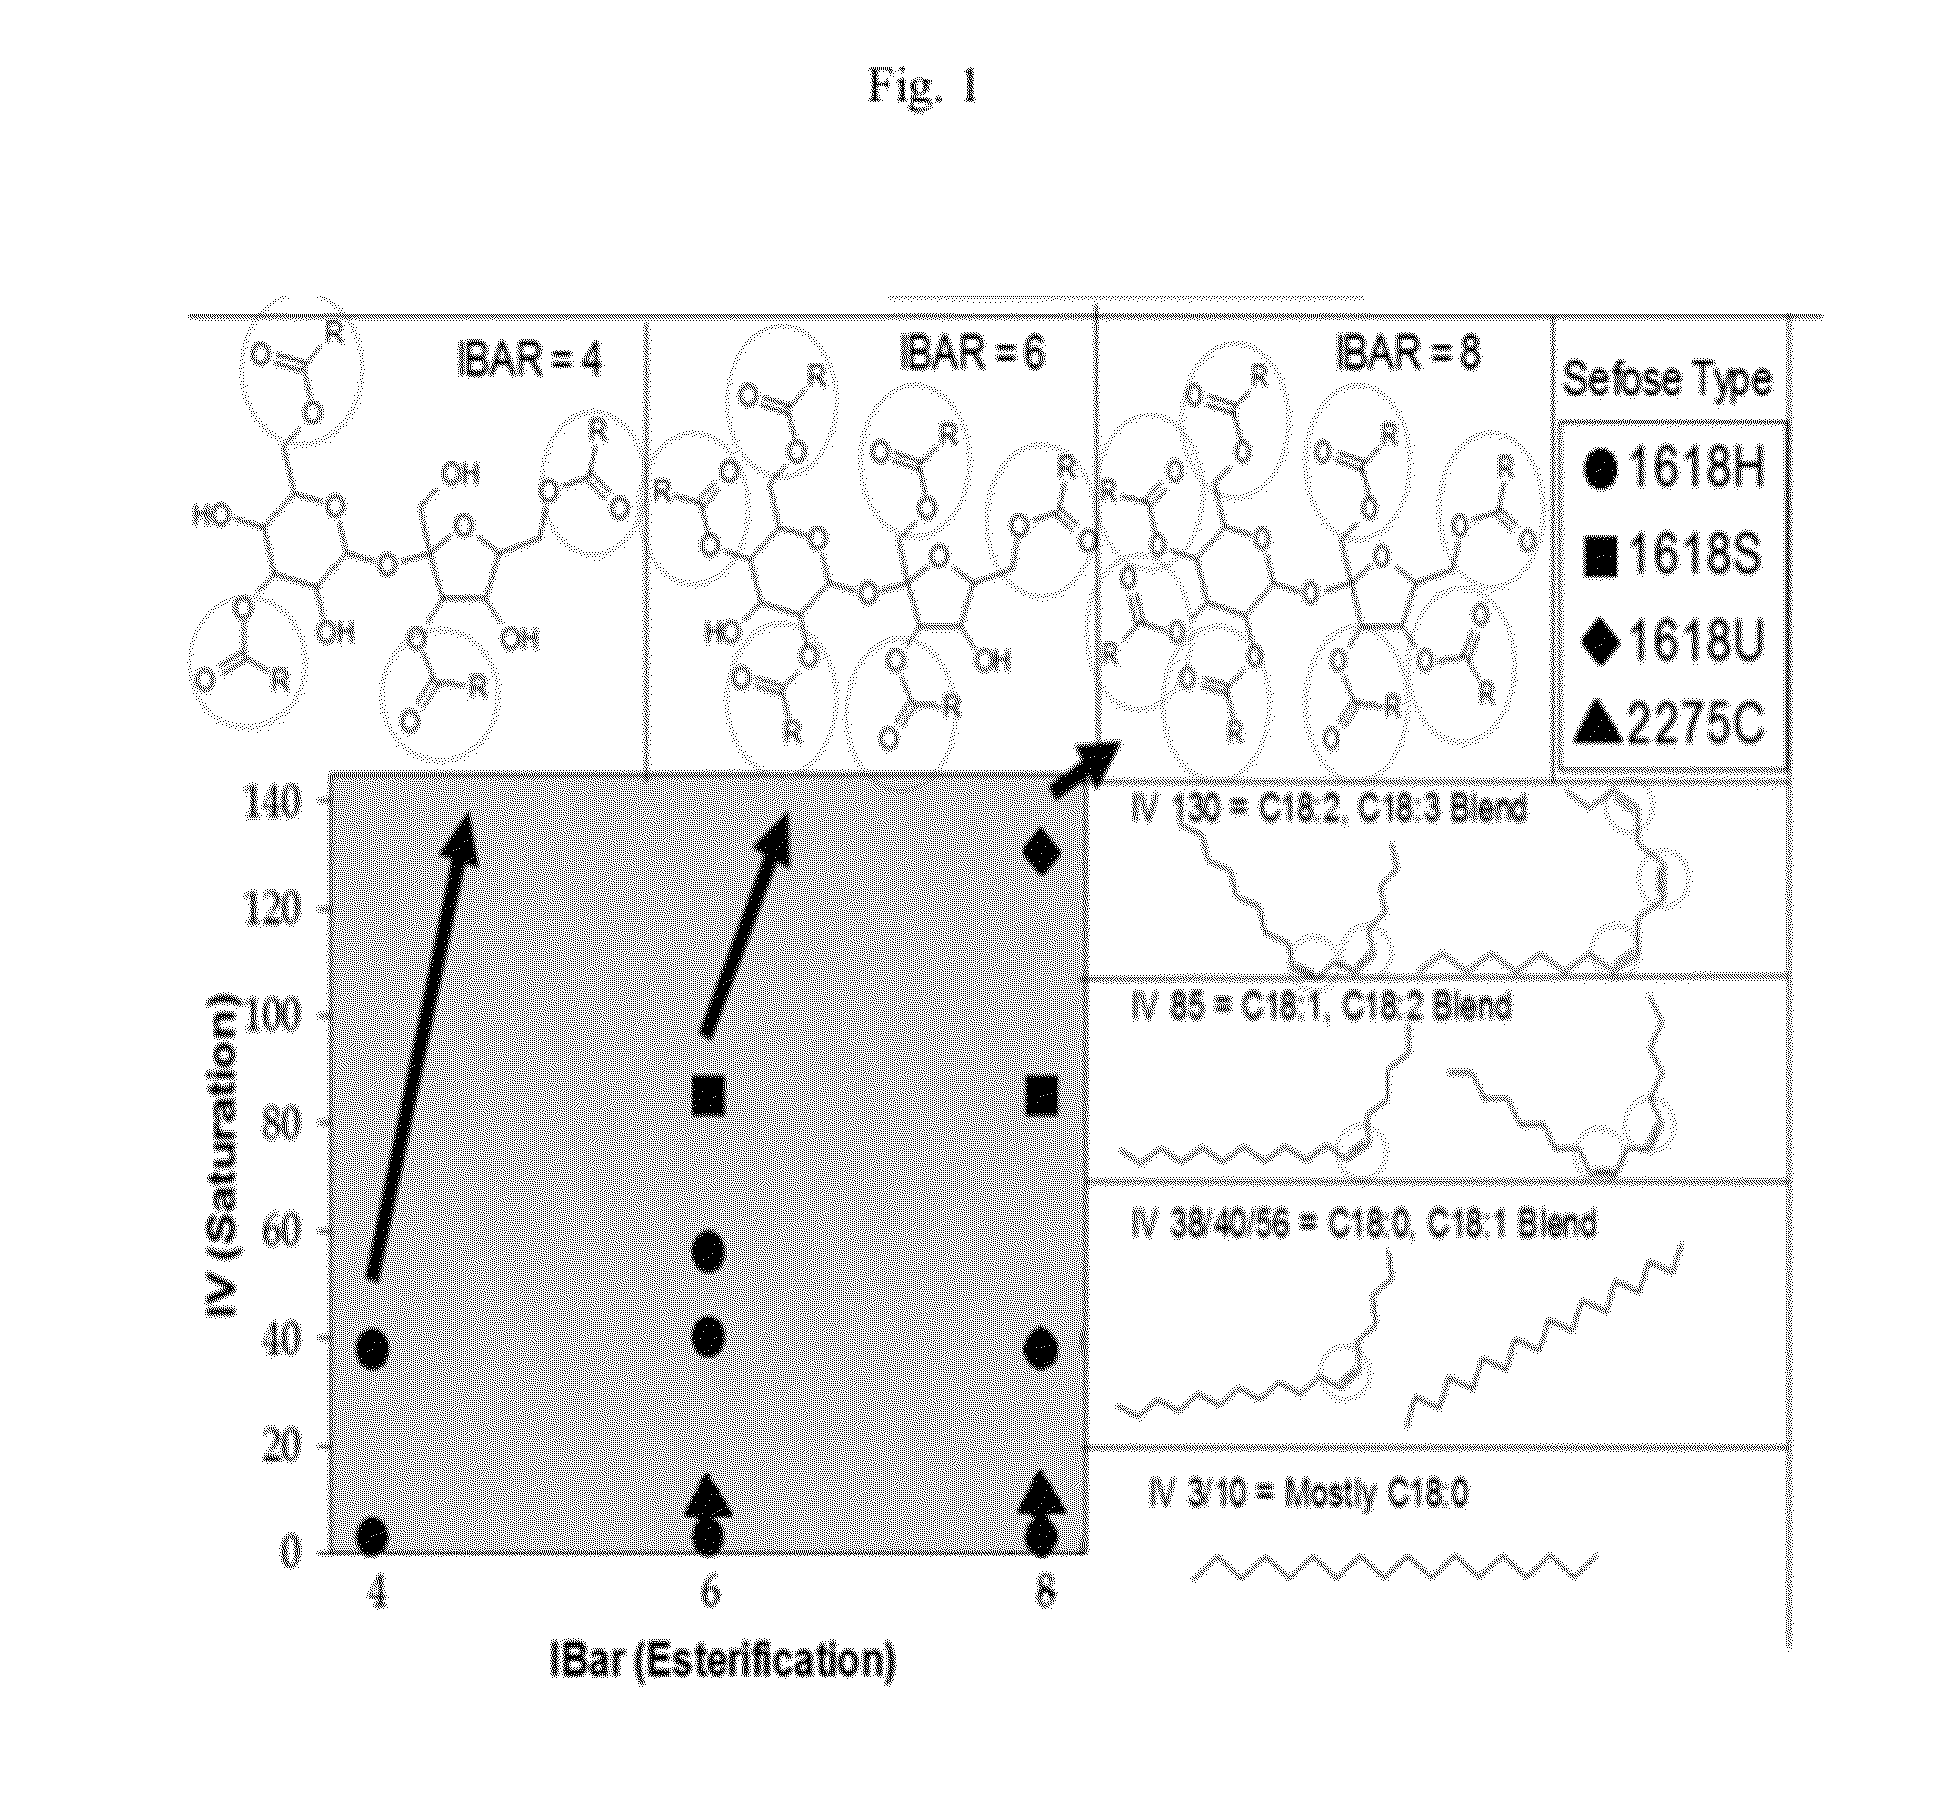 Hair Care Compositions Comprising Sucrose Polyesters